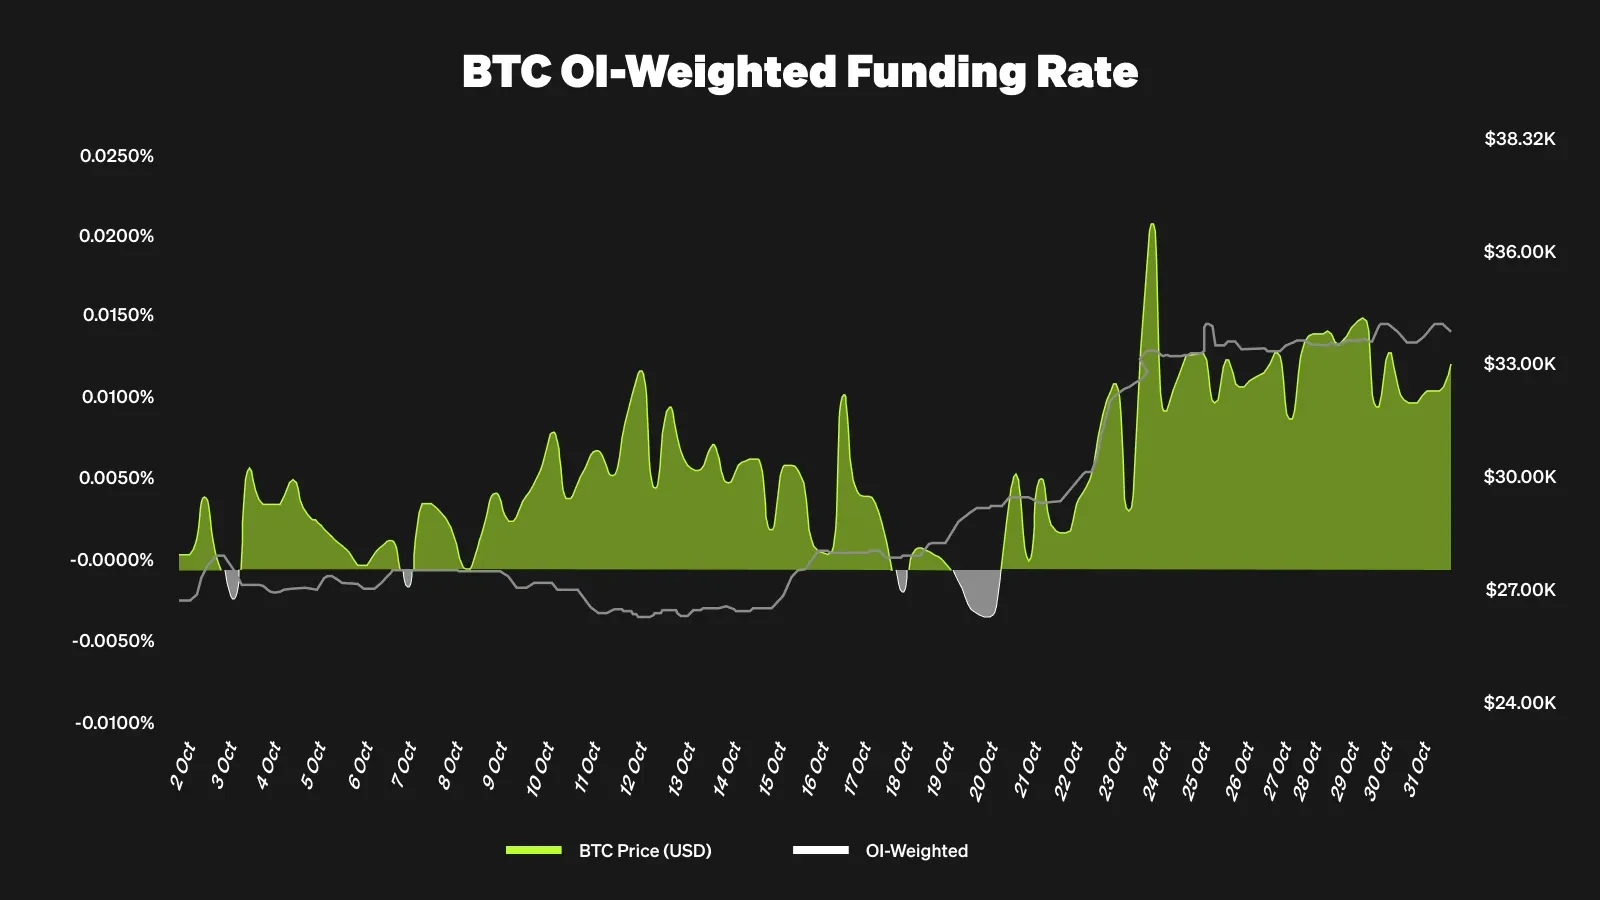 BTC OI-Weighted Funding Rate